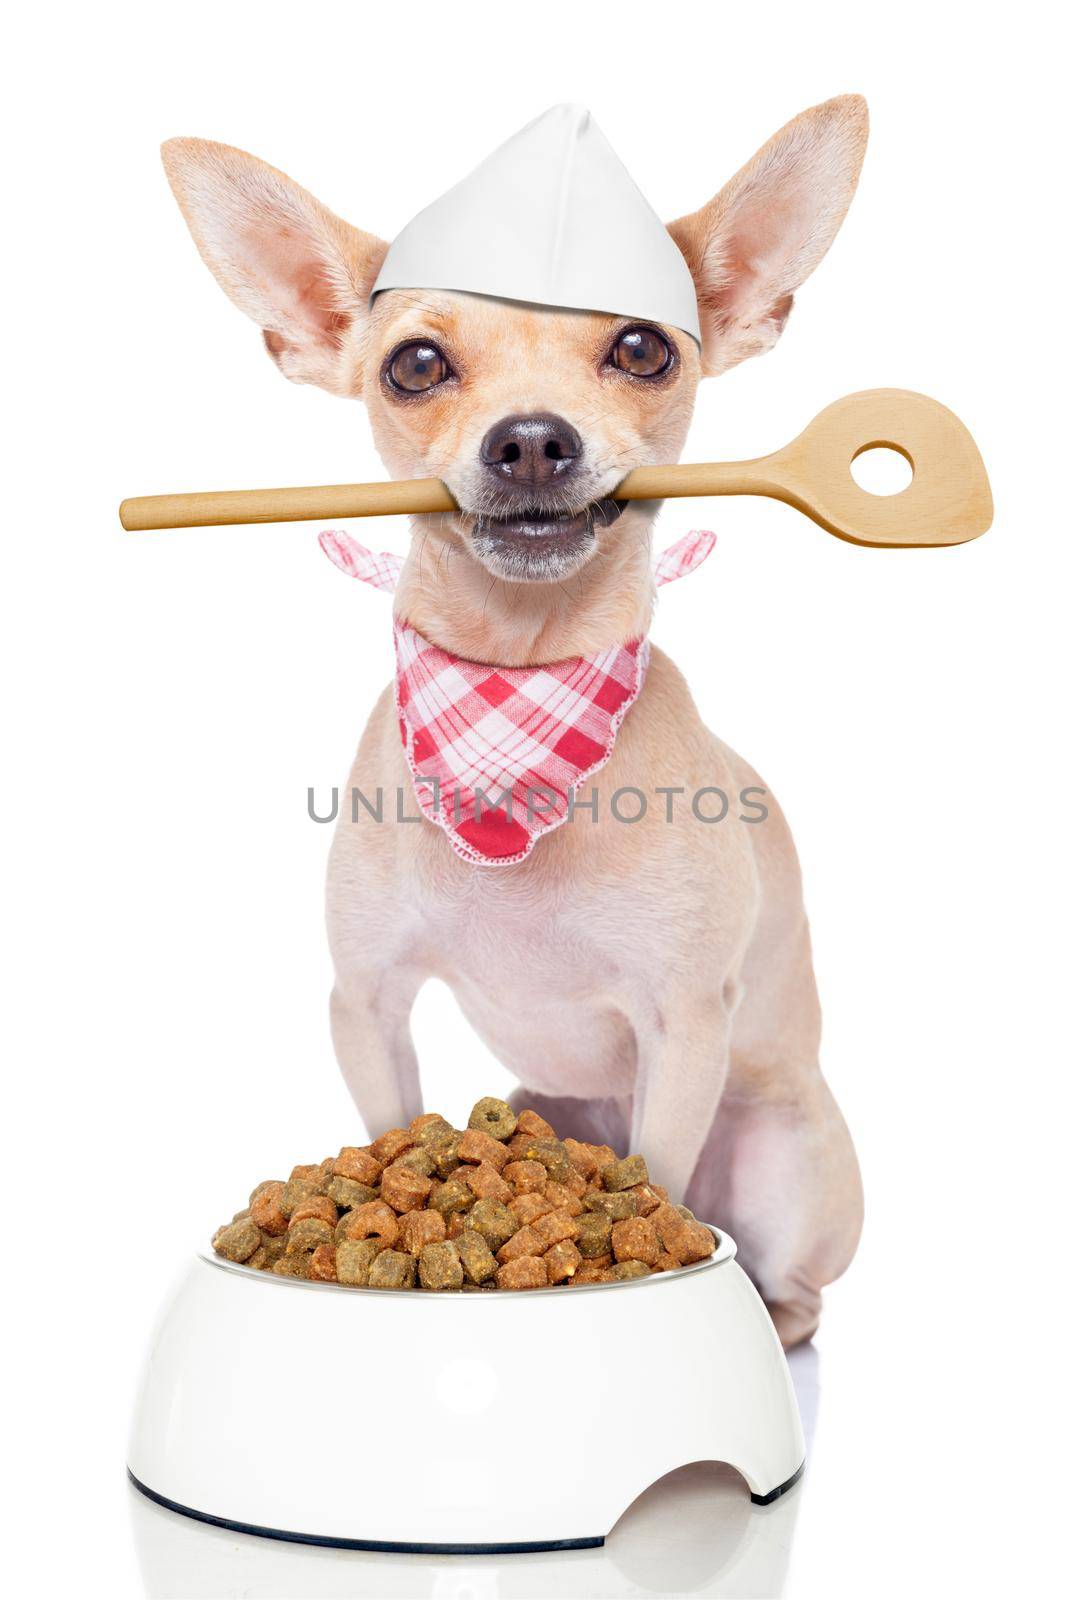 chef cook chihuahua dog with a food bowl holding a cooking spoon in mouth , isolated on white background